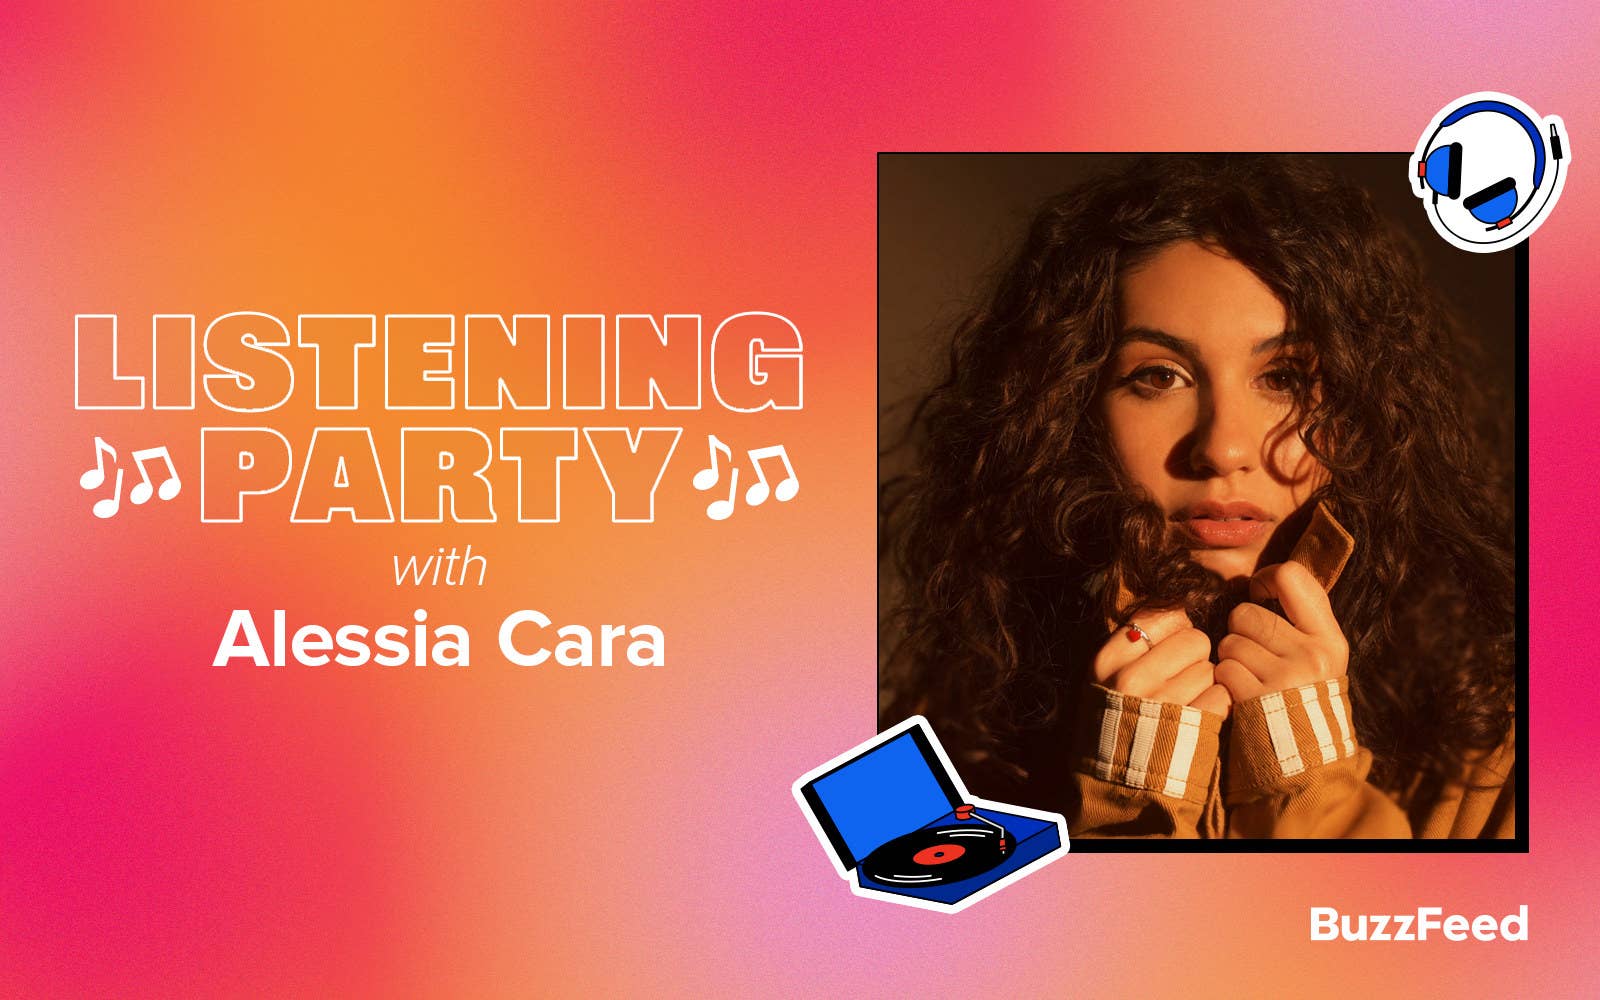 Header that says &quot;Listening Party with Alessia Cara&quot;